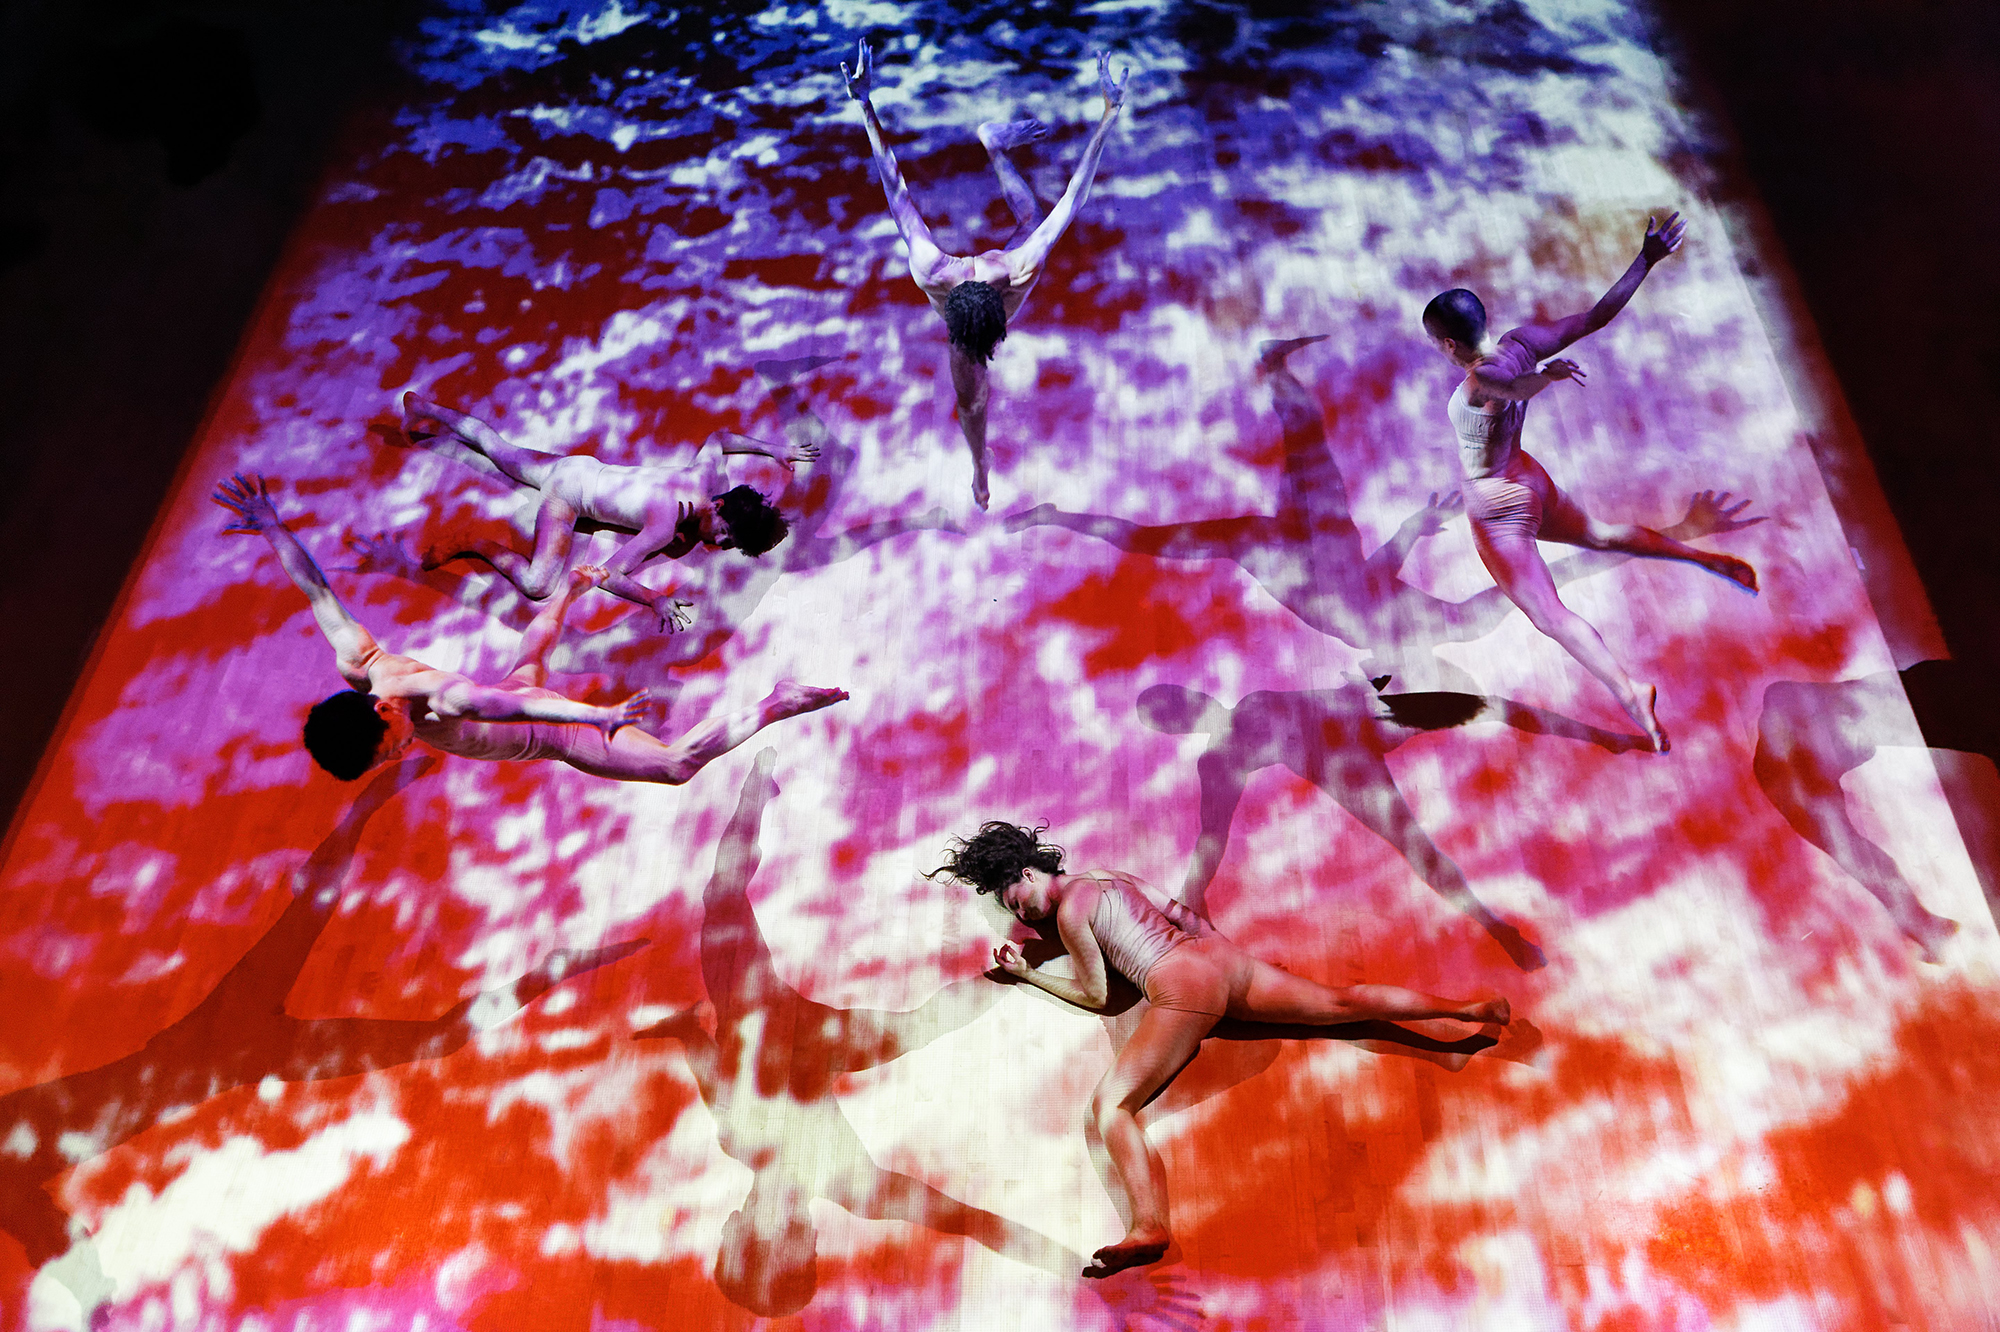 Three performers jump, and two performers are on the floor under the red and purple abstract video projection.